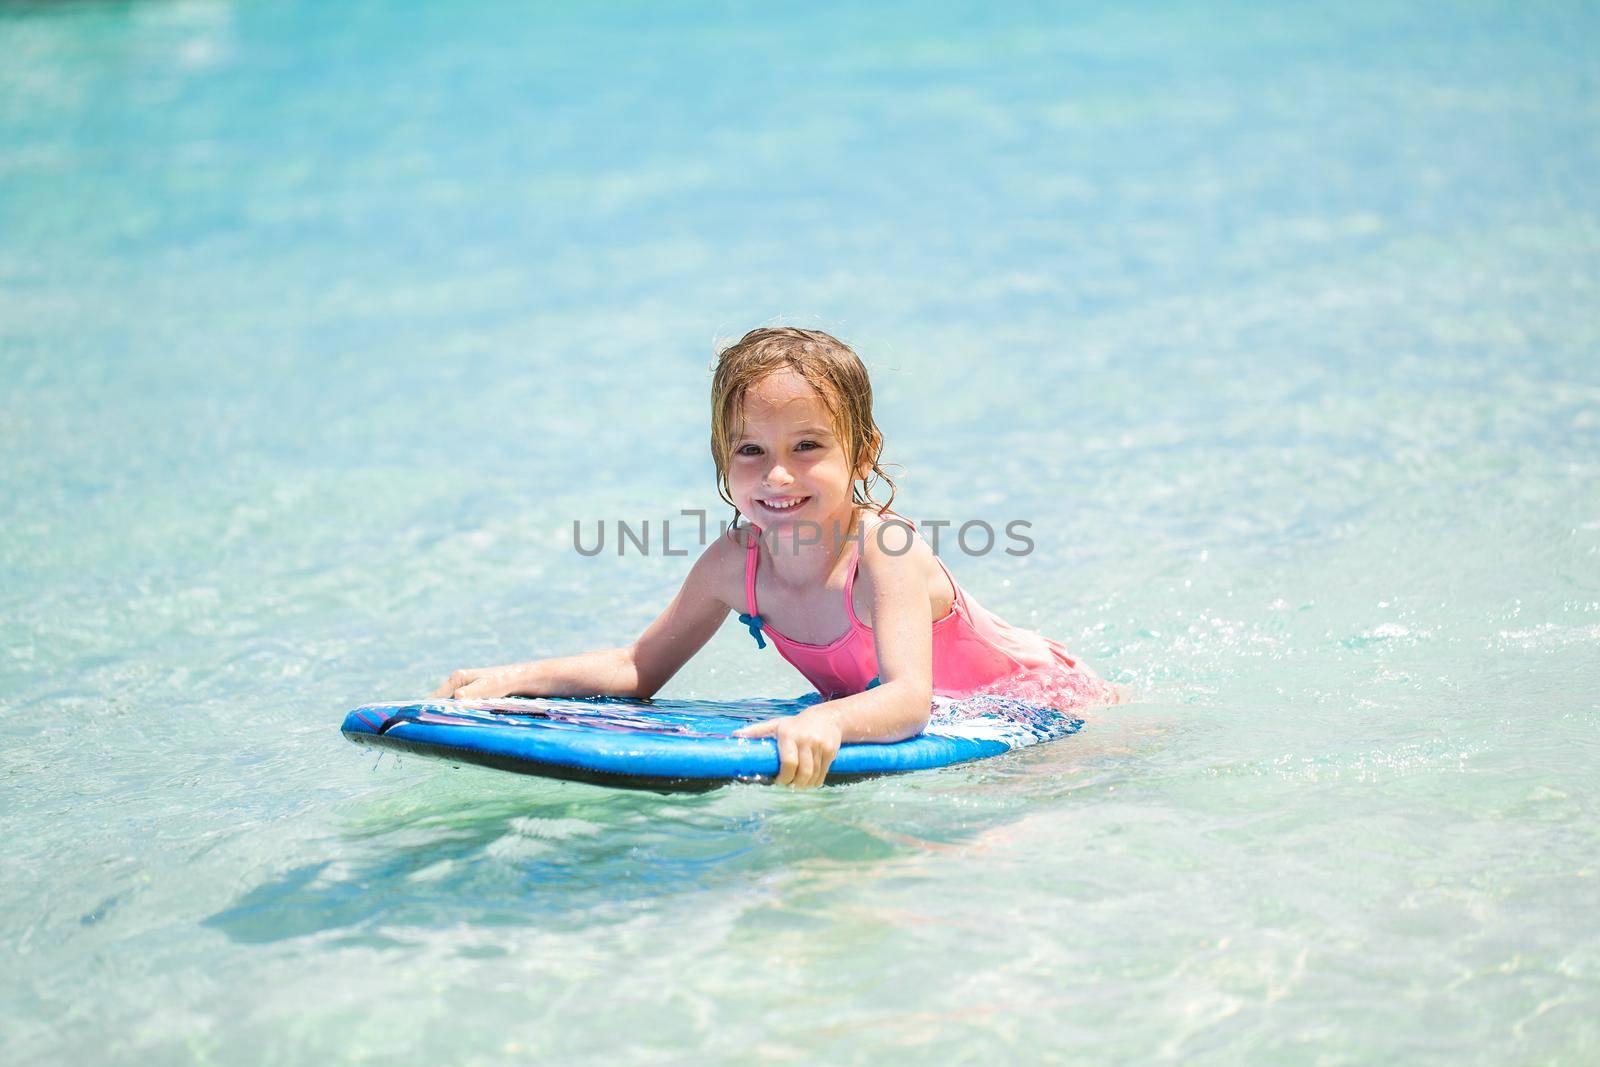 Little baby girl - young surfer with bodyboard has a fun on small ocean waves. Active family lifestyle